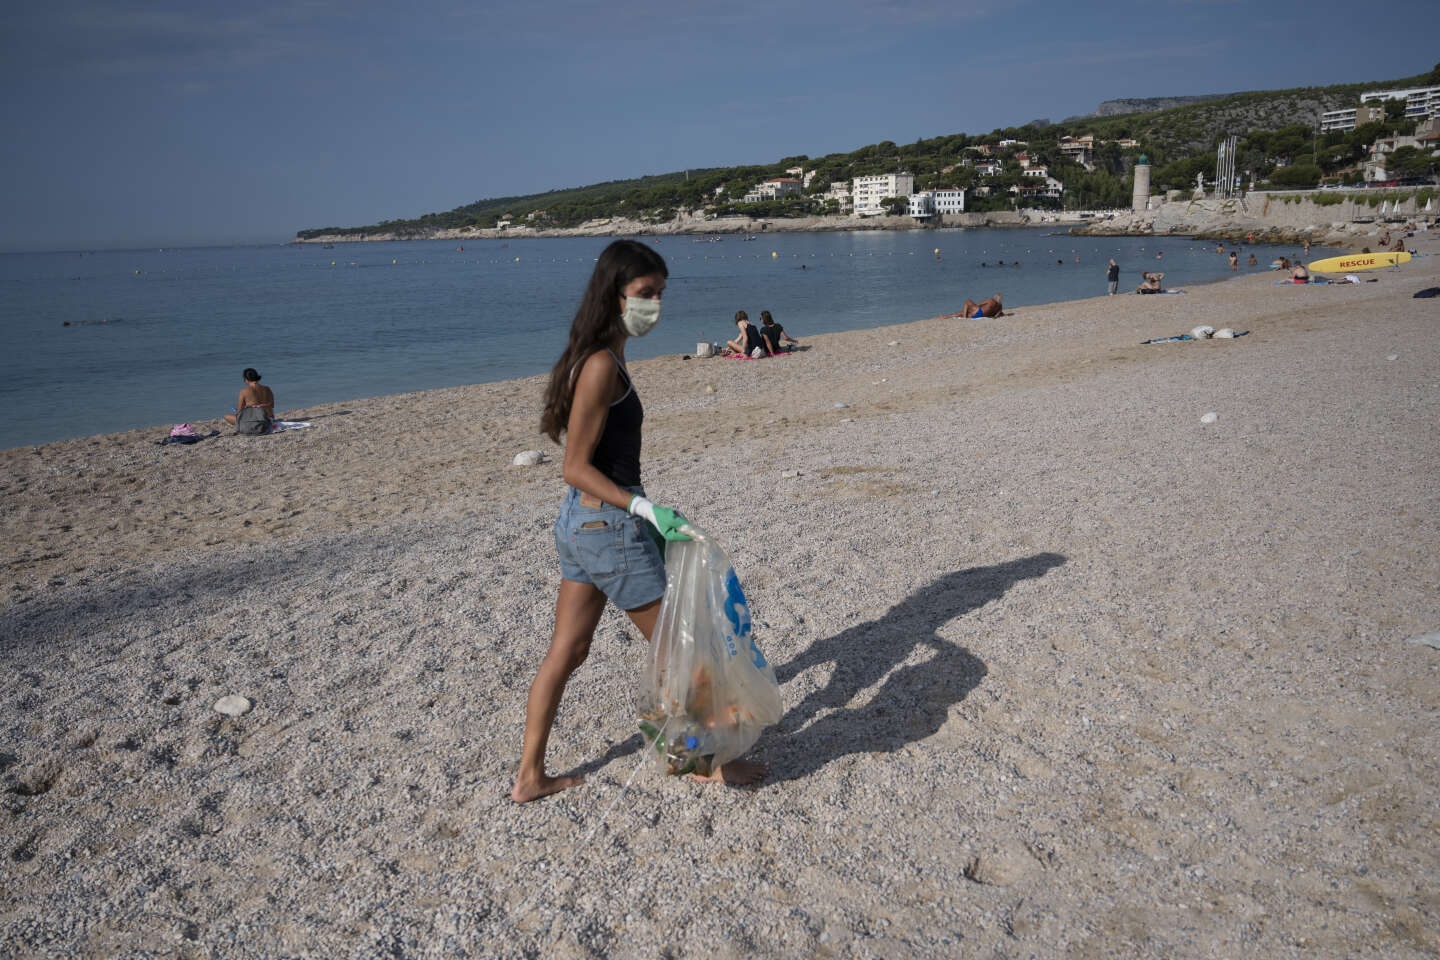 In Marseille, the Clean my Calanques association refuses to carry the Olympic flame for ecological reasons